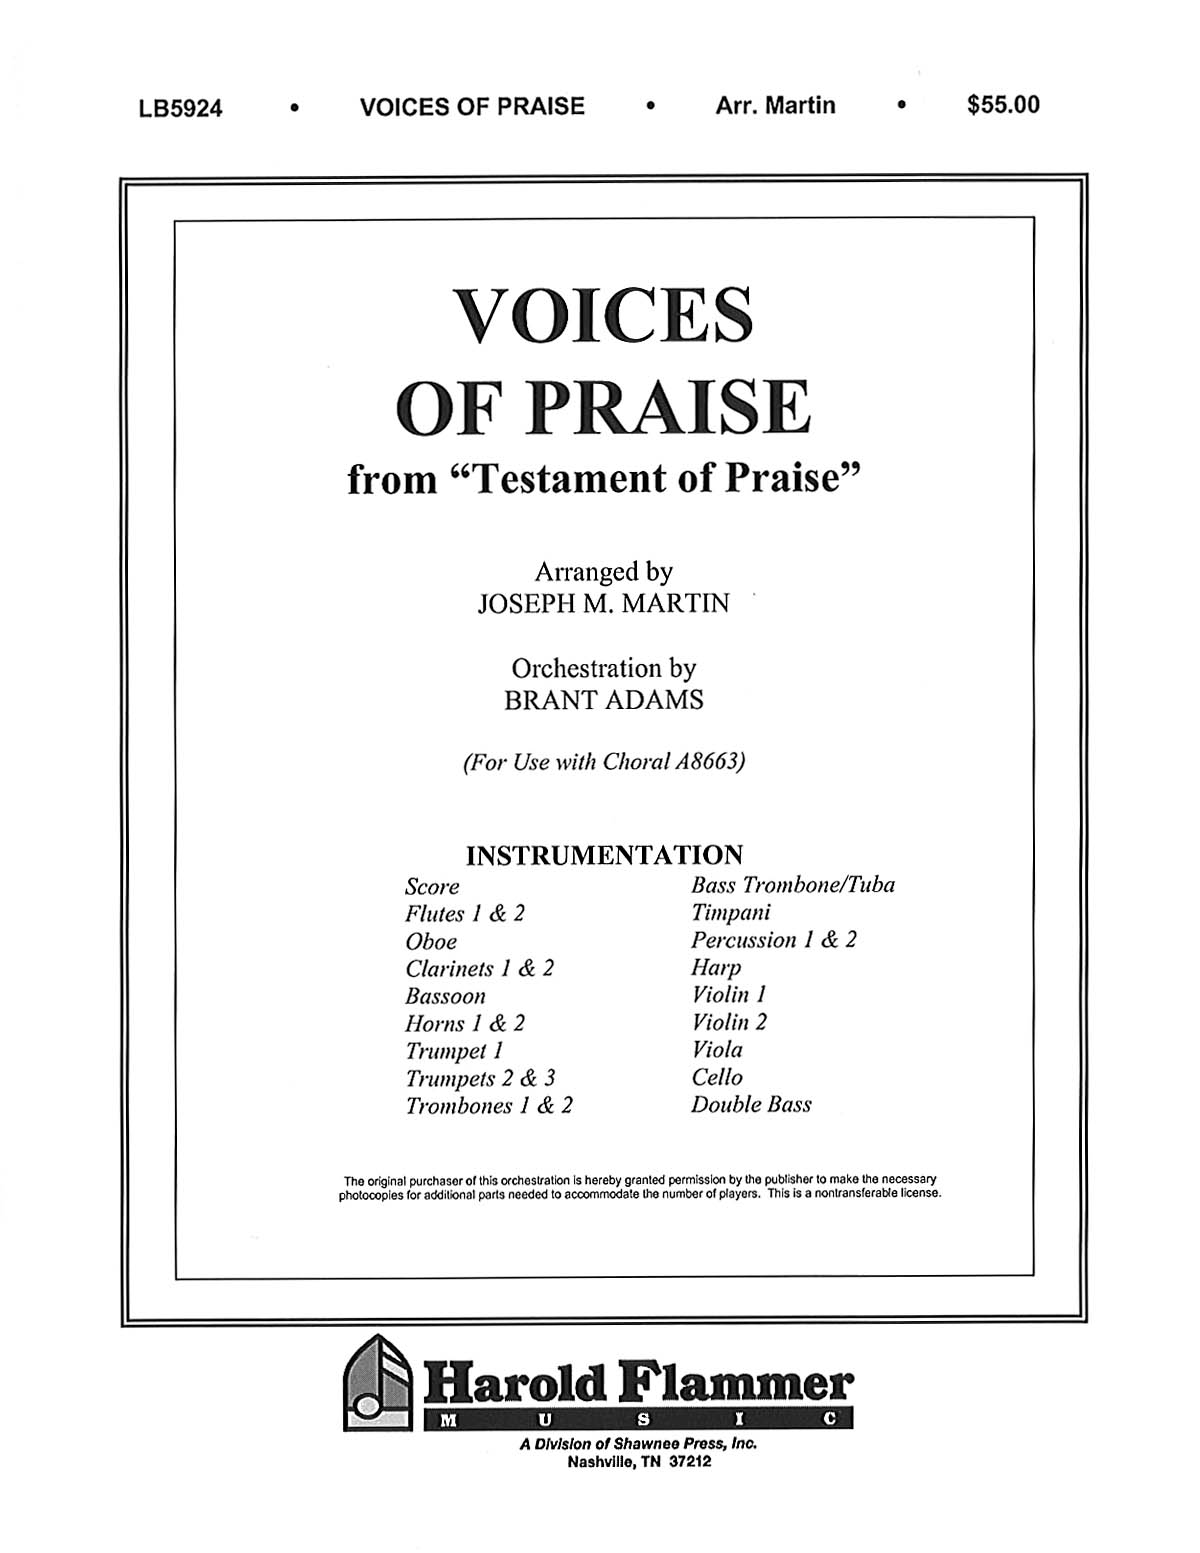 Voices of Praise from Testament of Praise